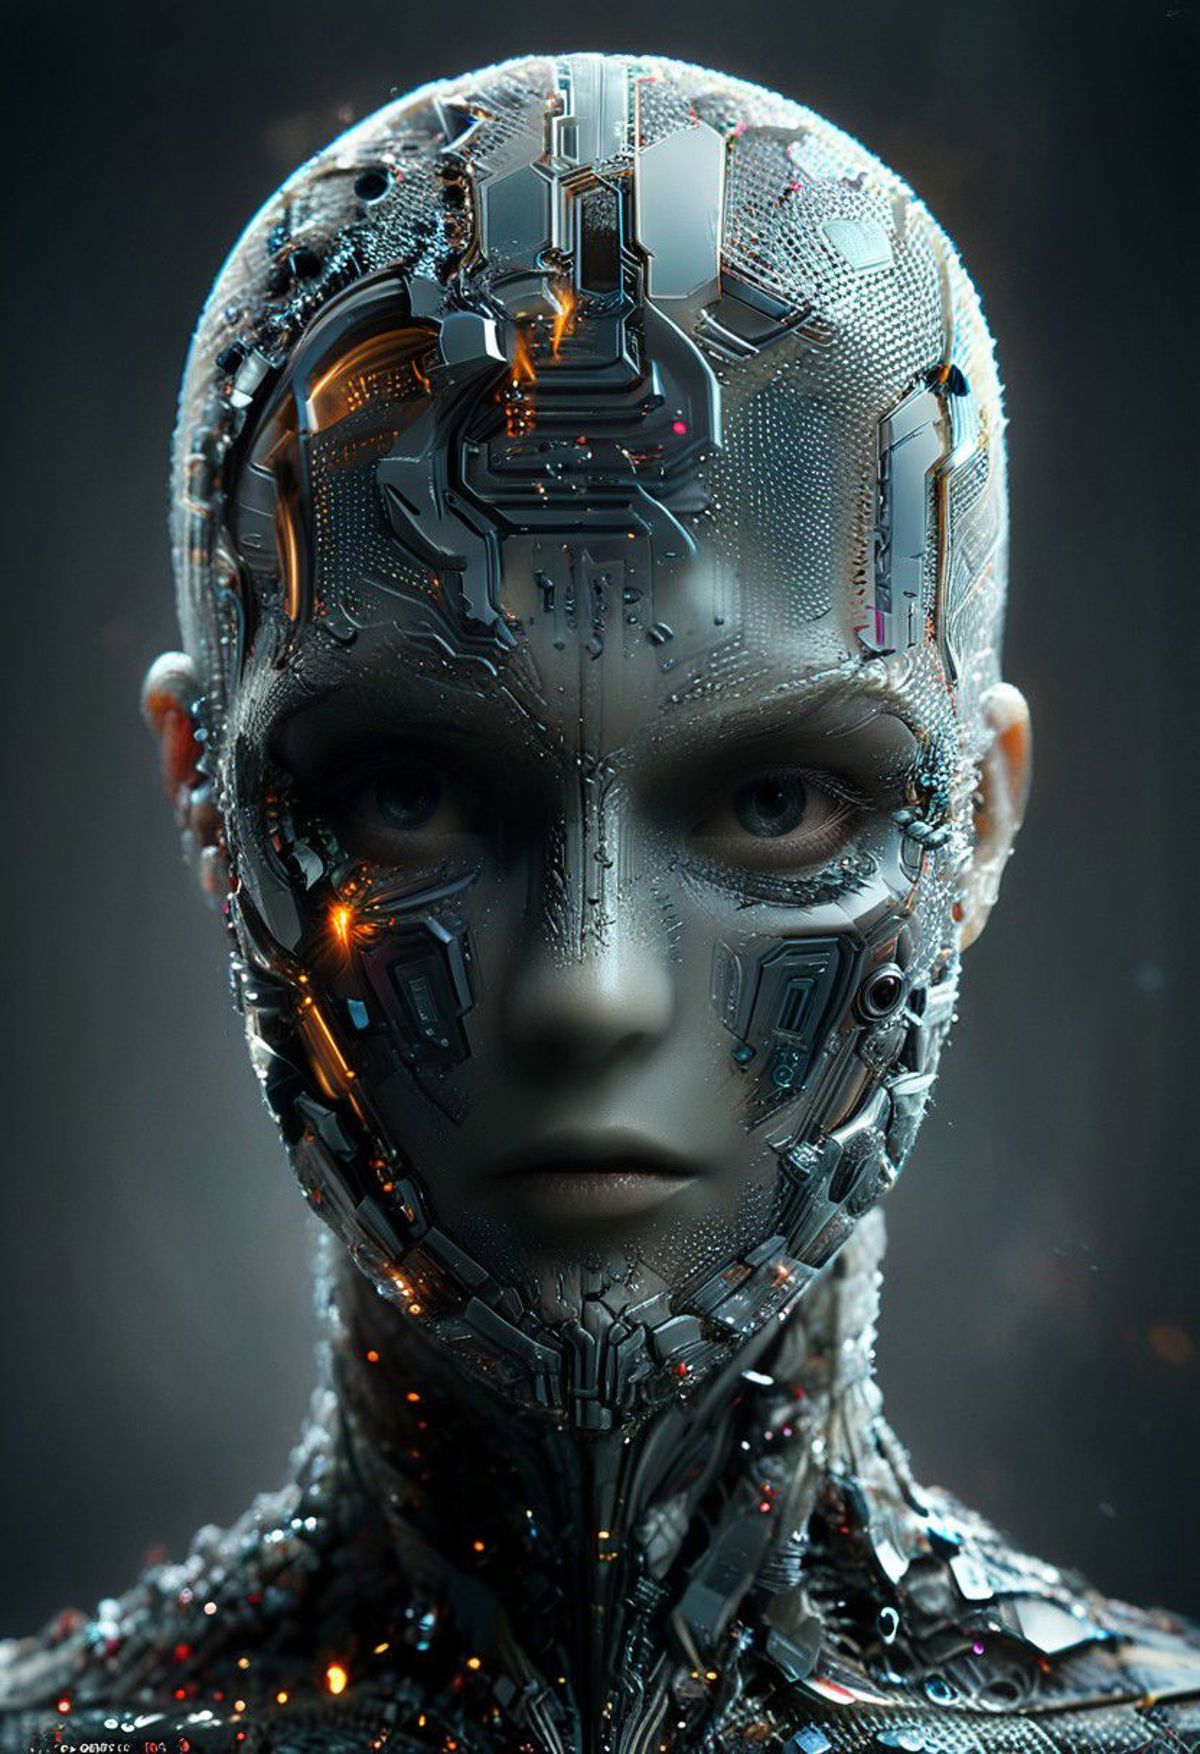 A robot with a metallic face and blue eyes.